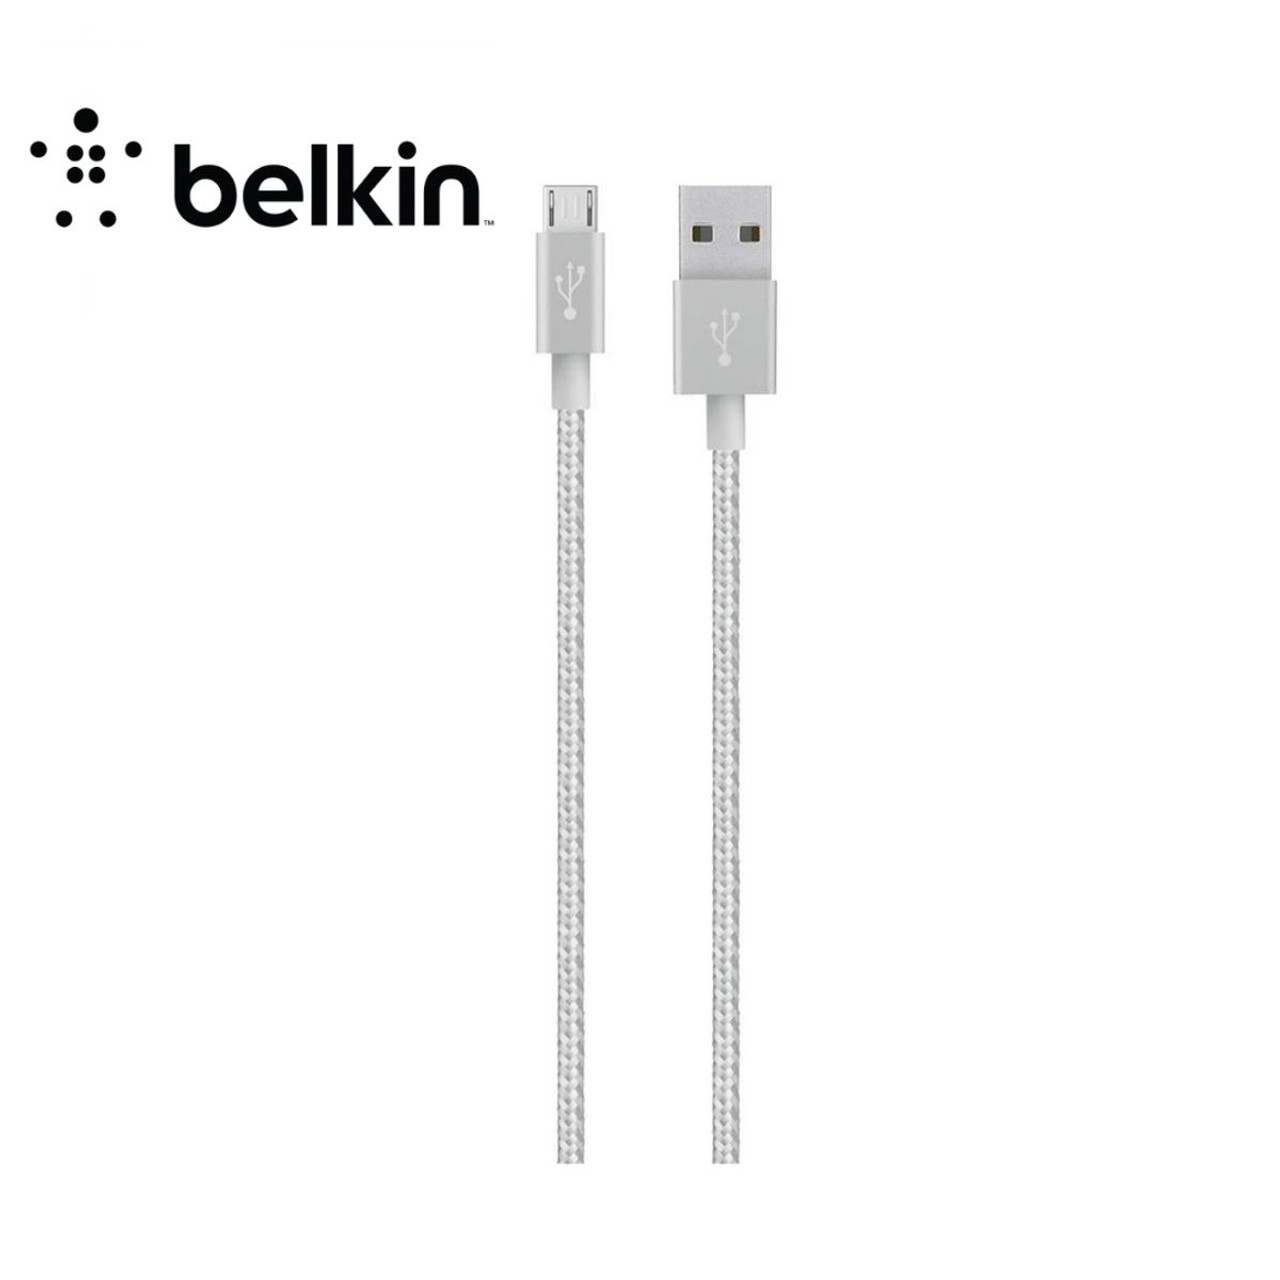 Belkin Mixit Braided Micro USB Cable - 3M product image